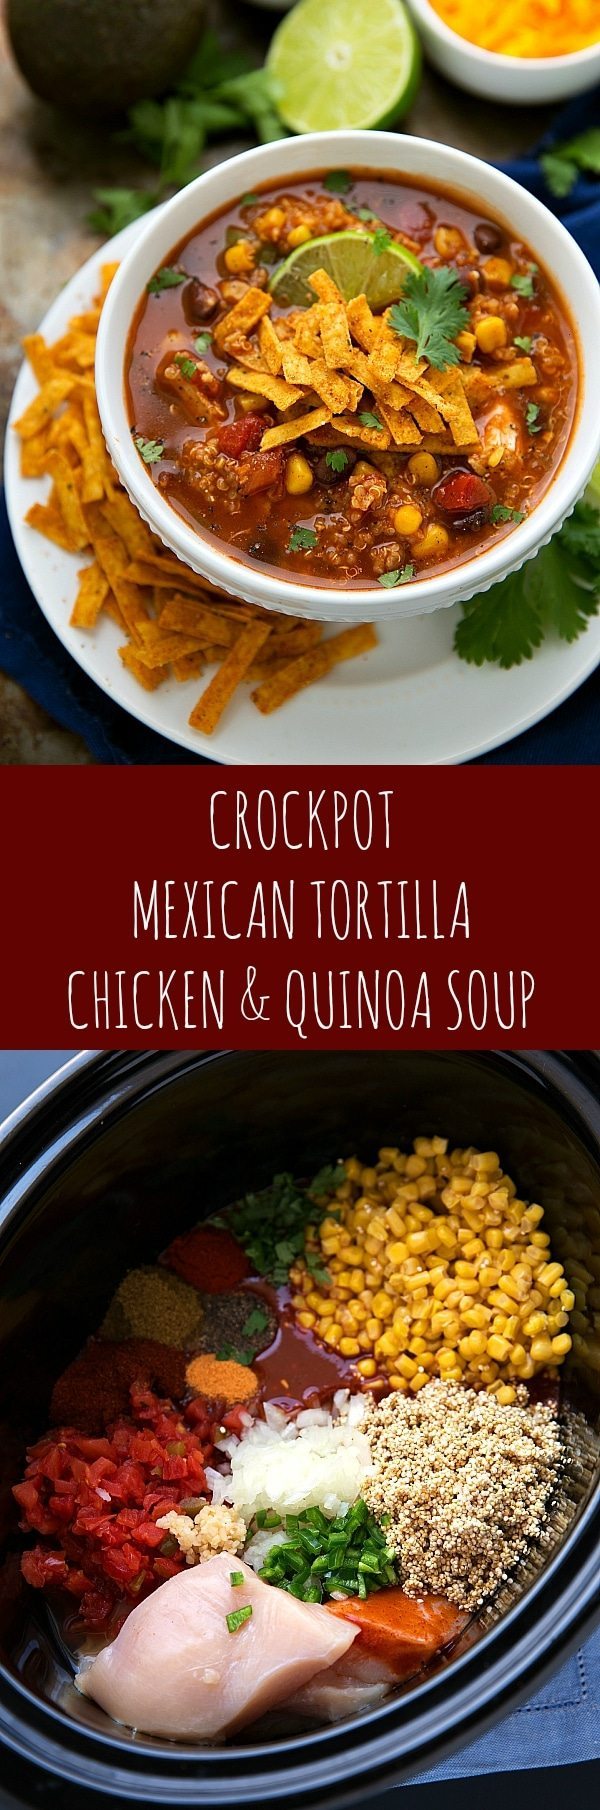 Simple (Dump it and forget it!) Slow Cooker Mexican Tortilla Chicken & Quinoa Soup